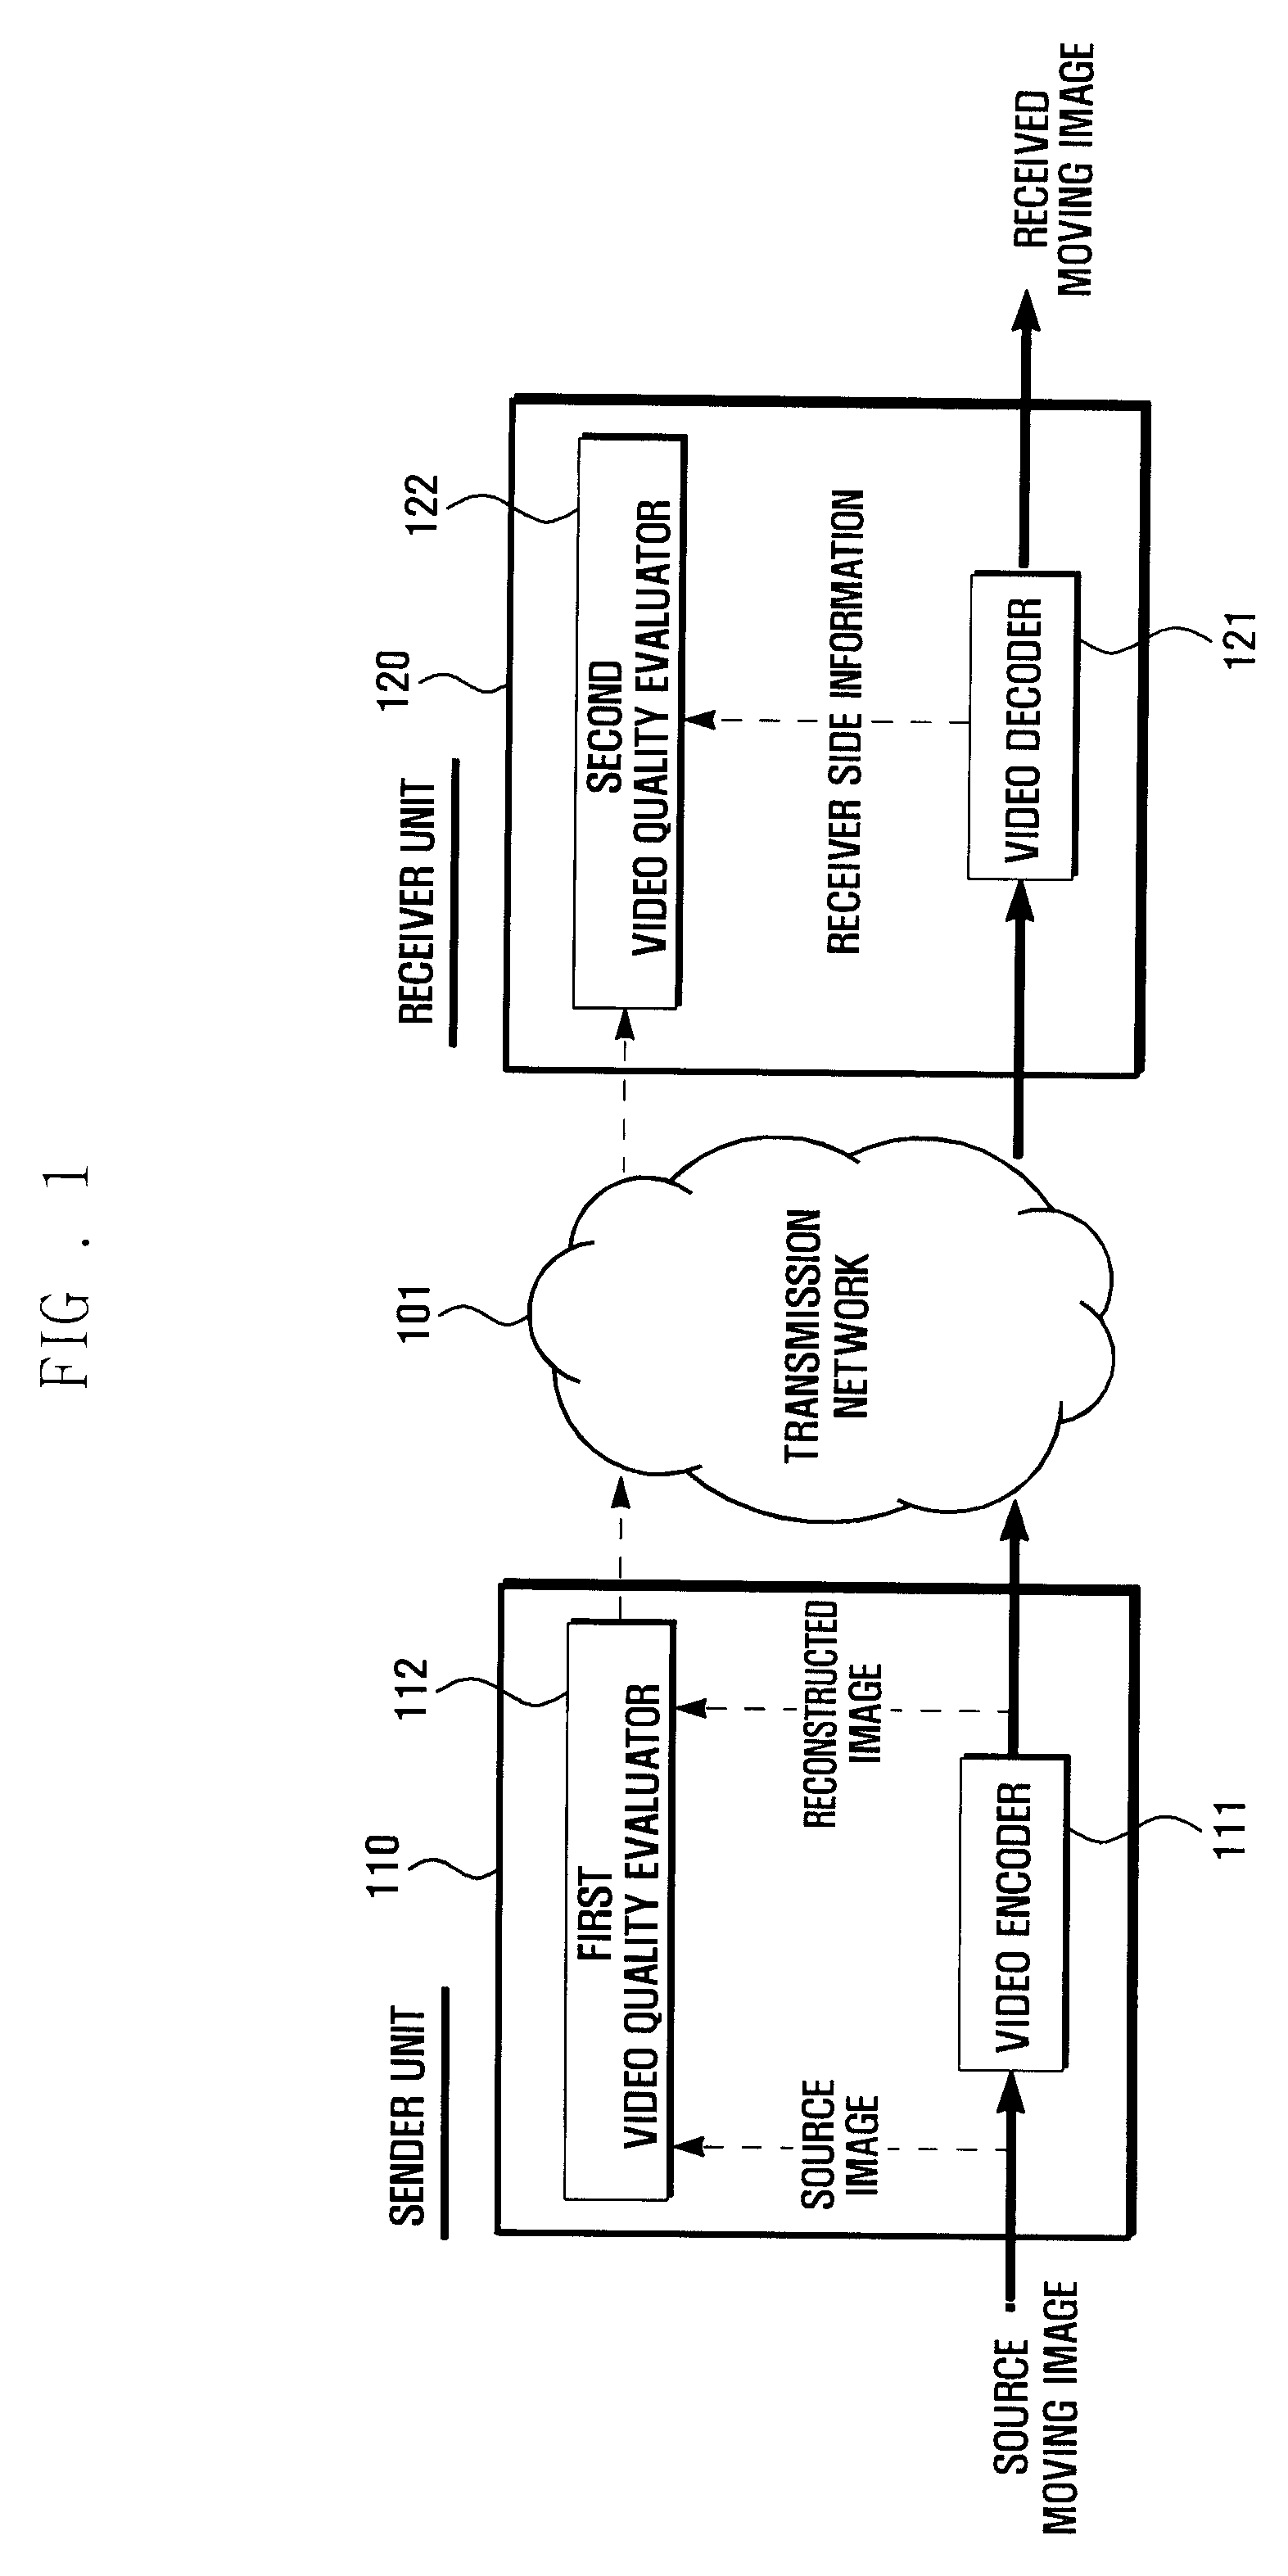 System and method for real-time video quality assessment based on transmission properties